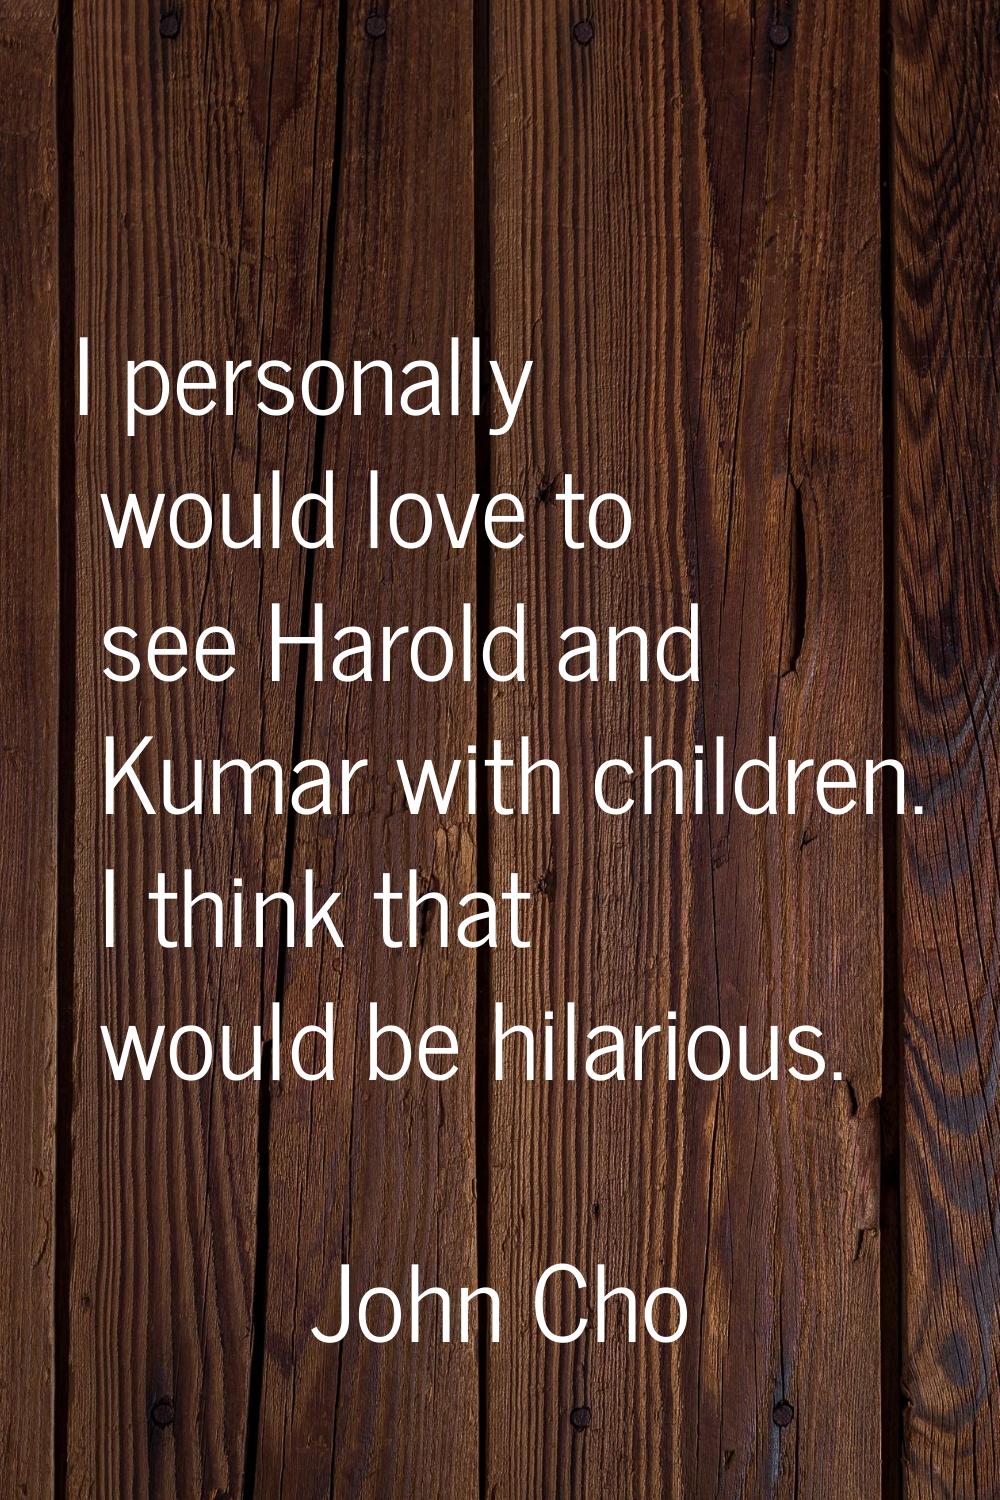 I personally would love to see Harold and Kumar with children. I think that would be hilarious.